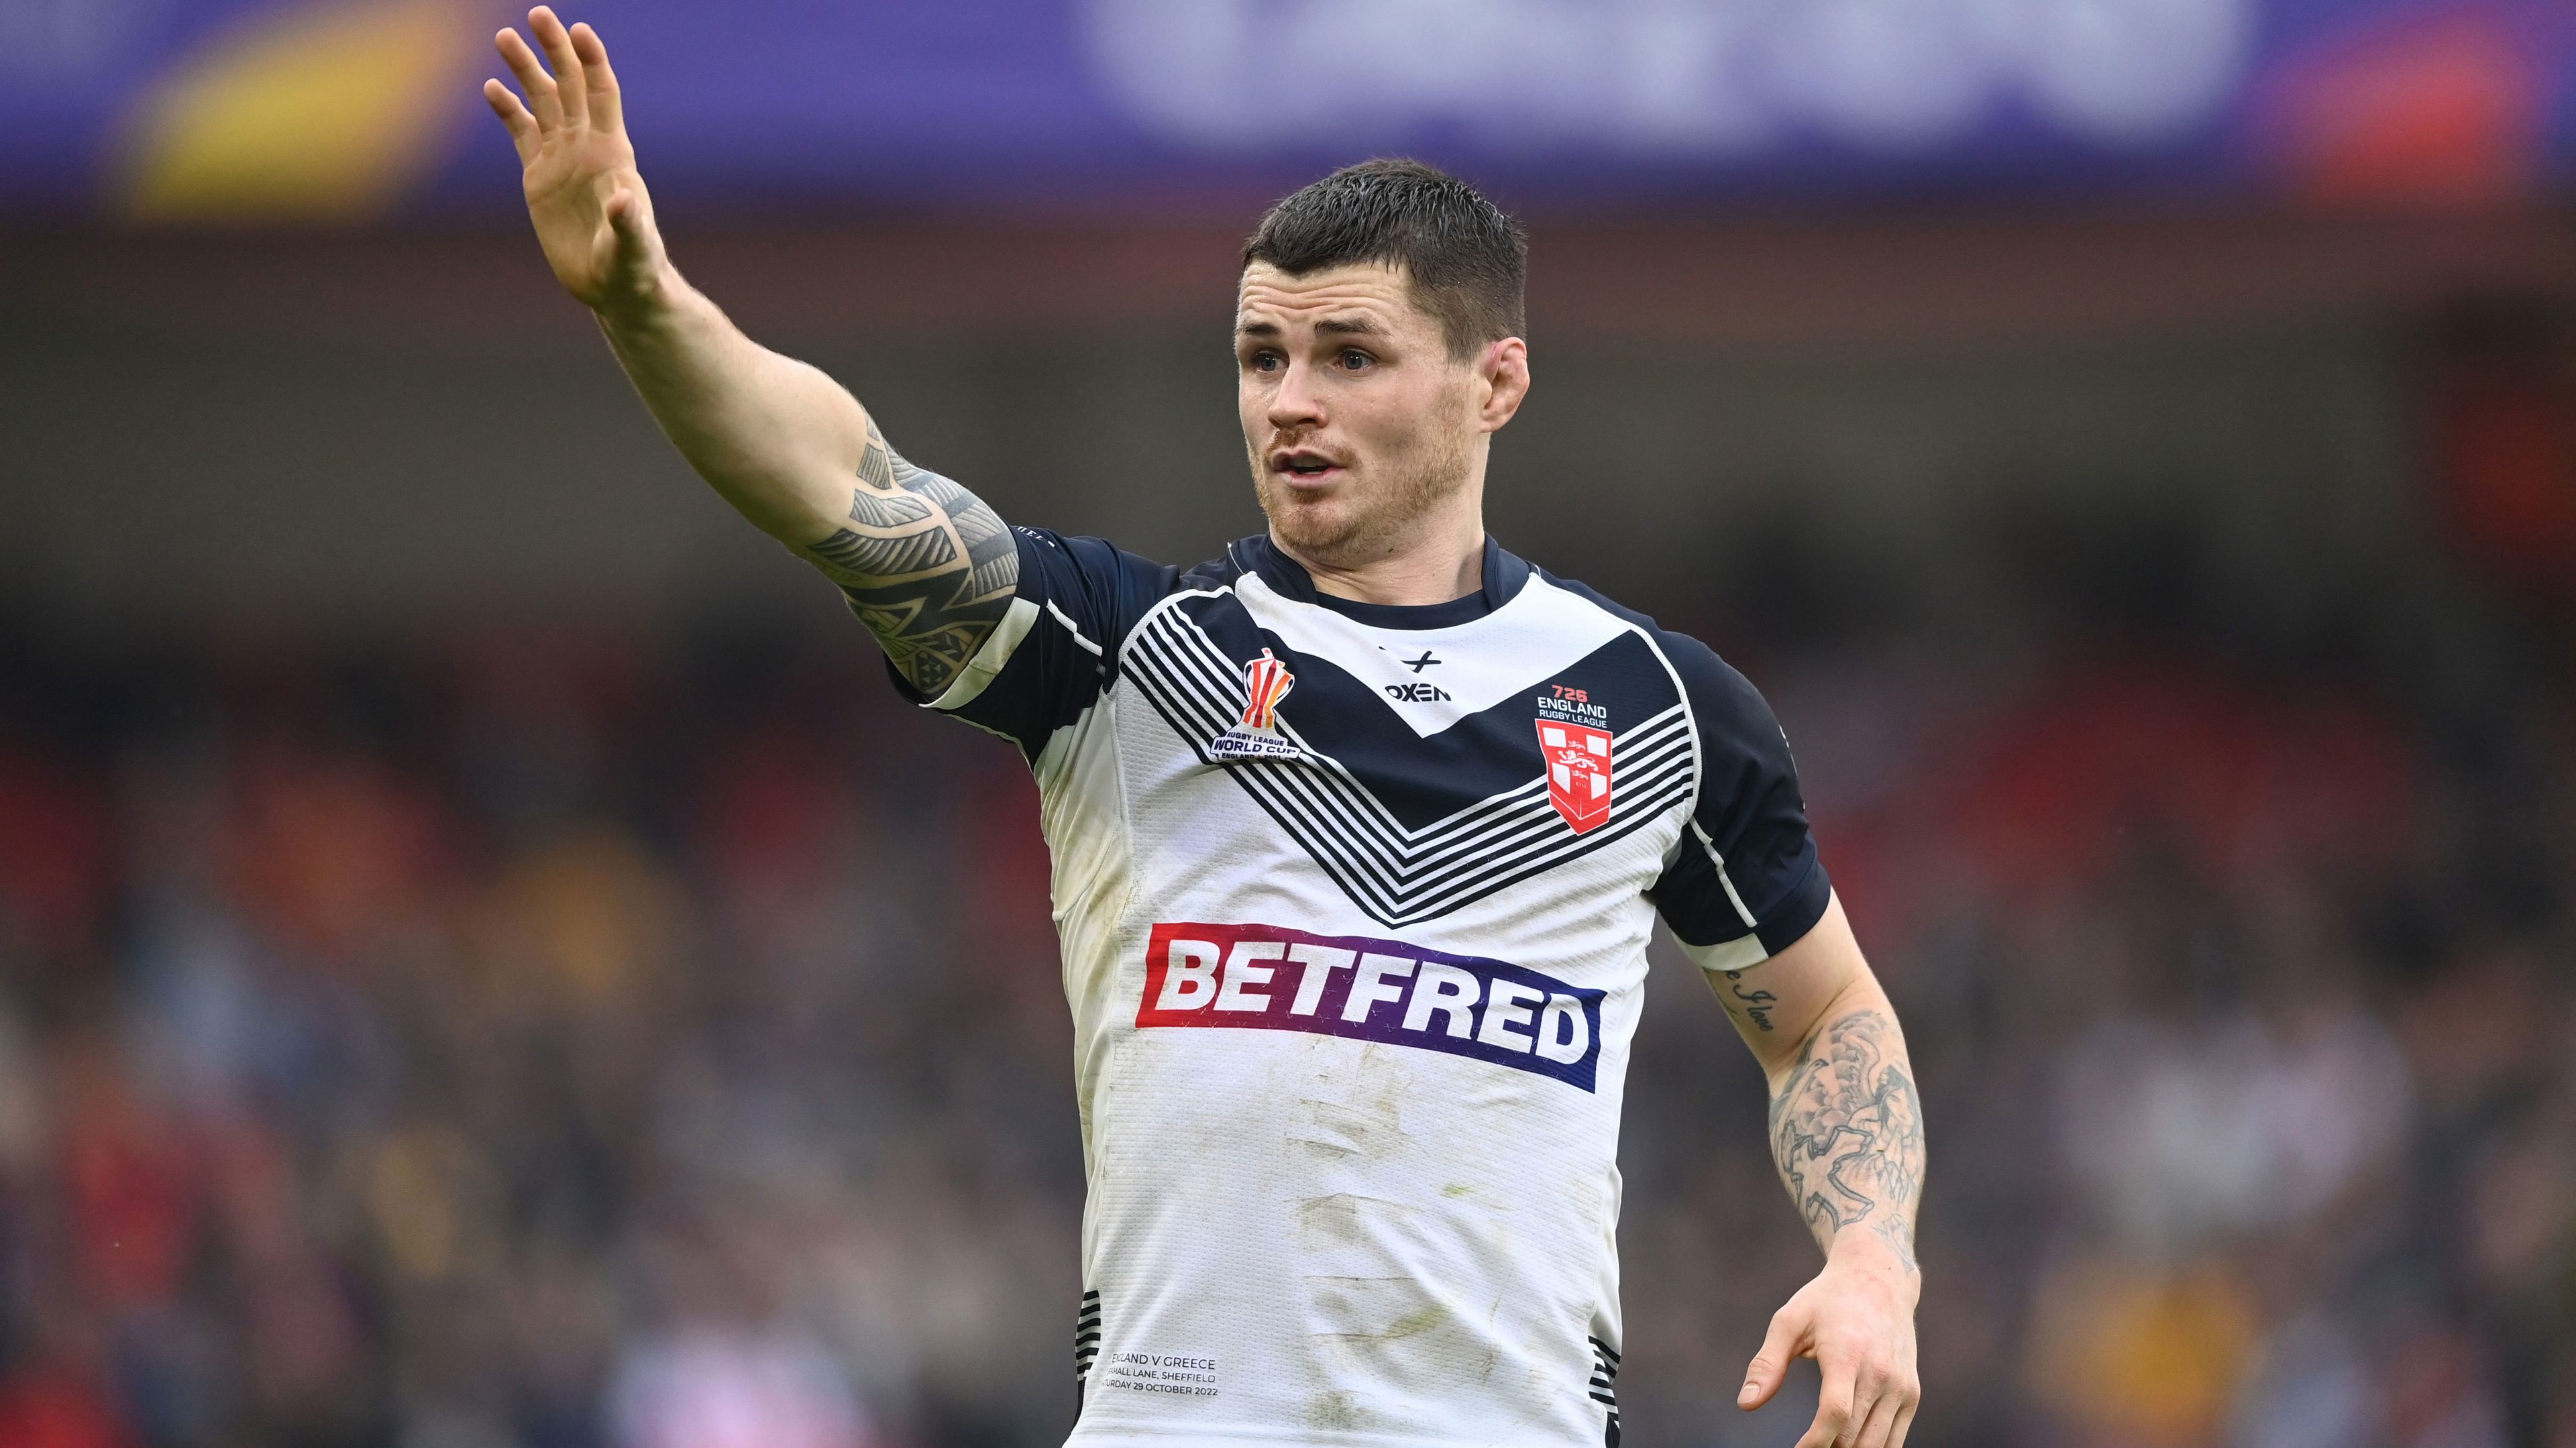 John Bateman during England&#x27;s Rugby League World Cup match against Greece at Bramall Lane on October 29, 2022 in Sheffield, England.